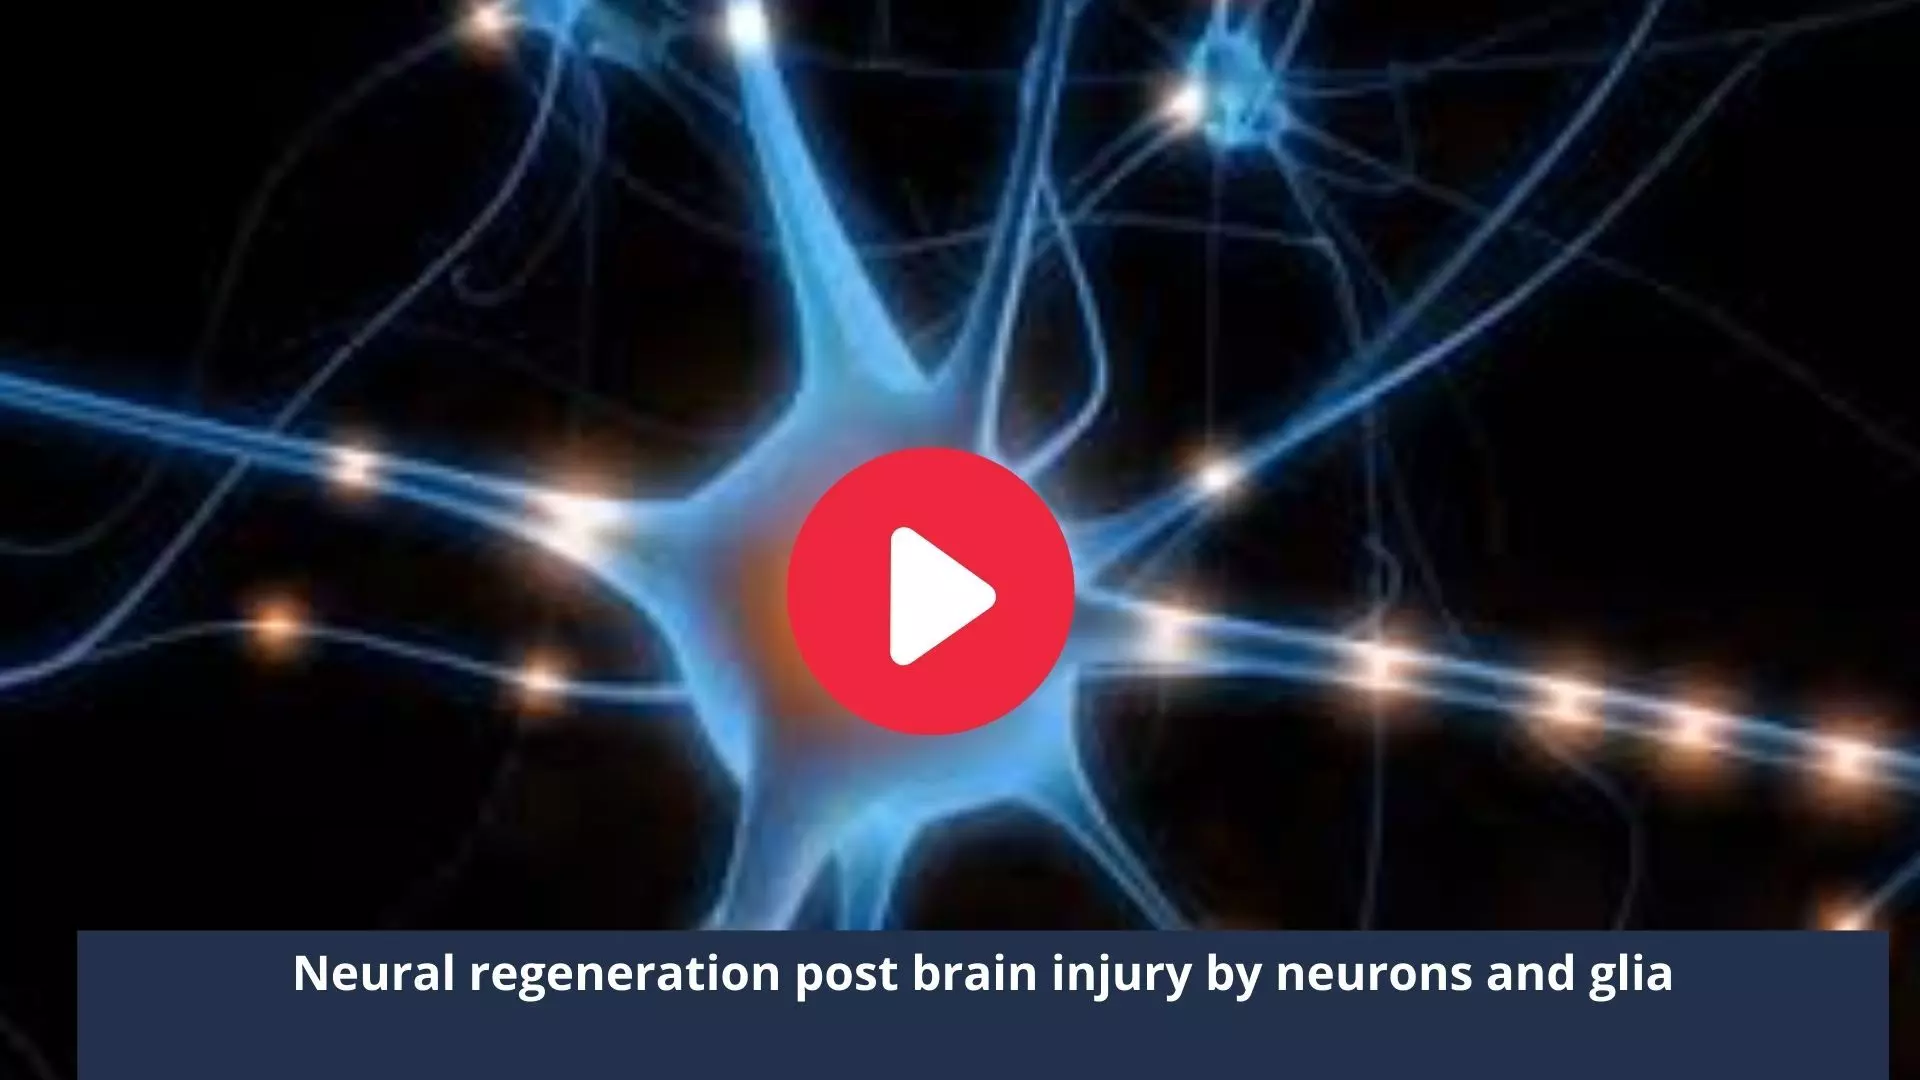 Neural regeneration post brain injury by neurons and glia